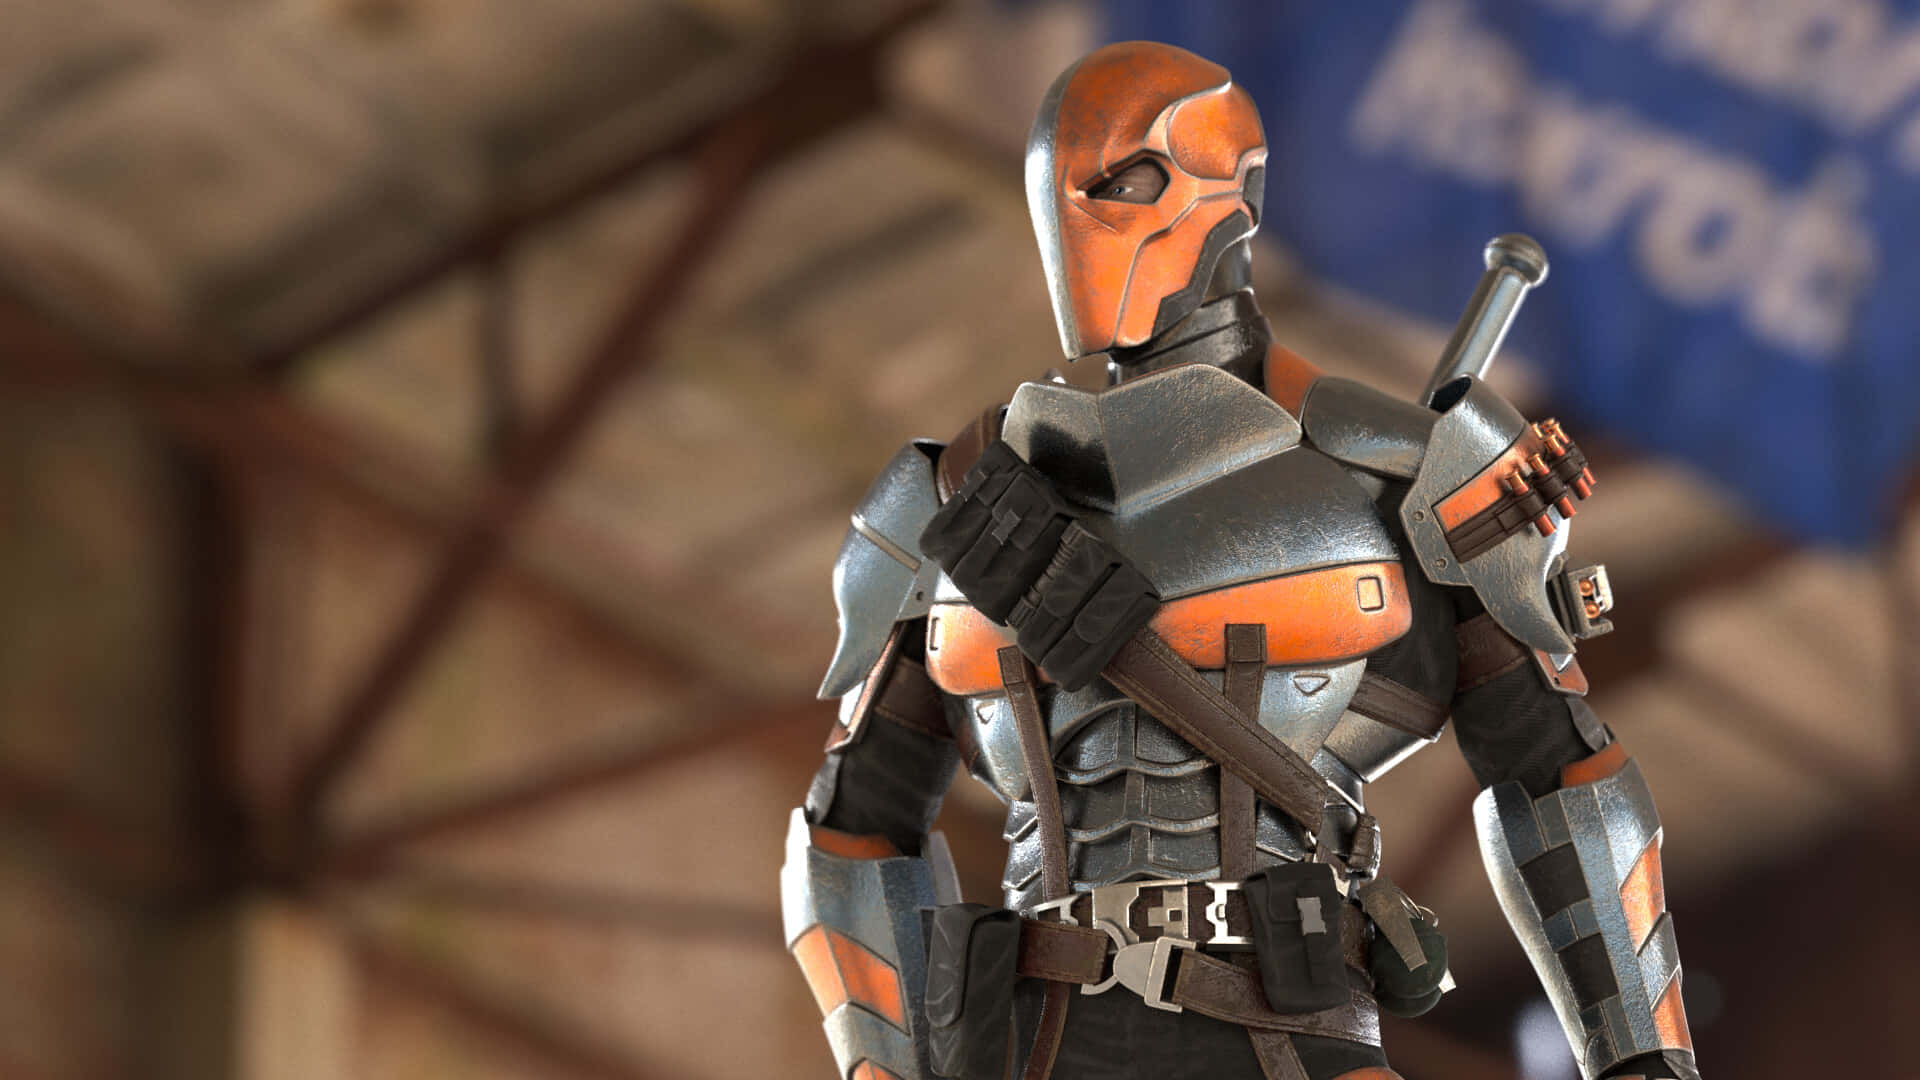 "A master assassin and mercenary, Deathstroke stands ready for action!"